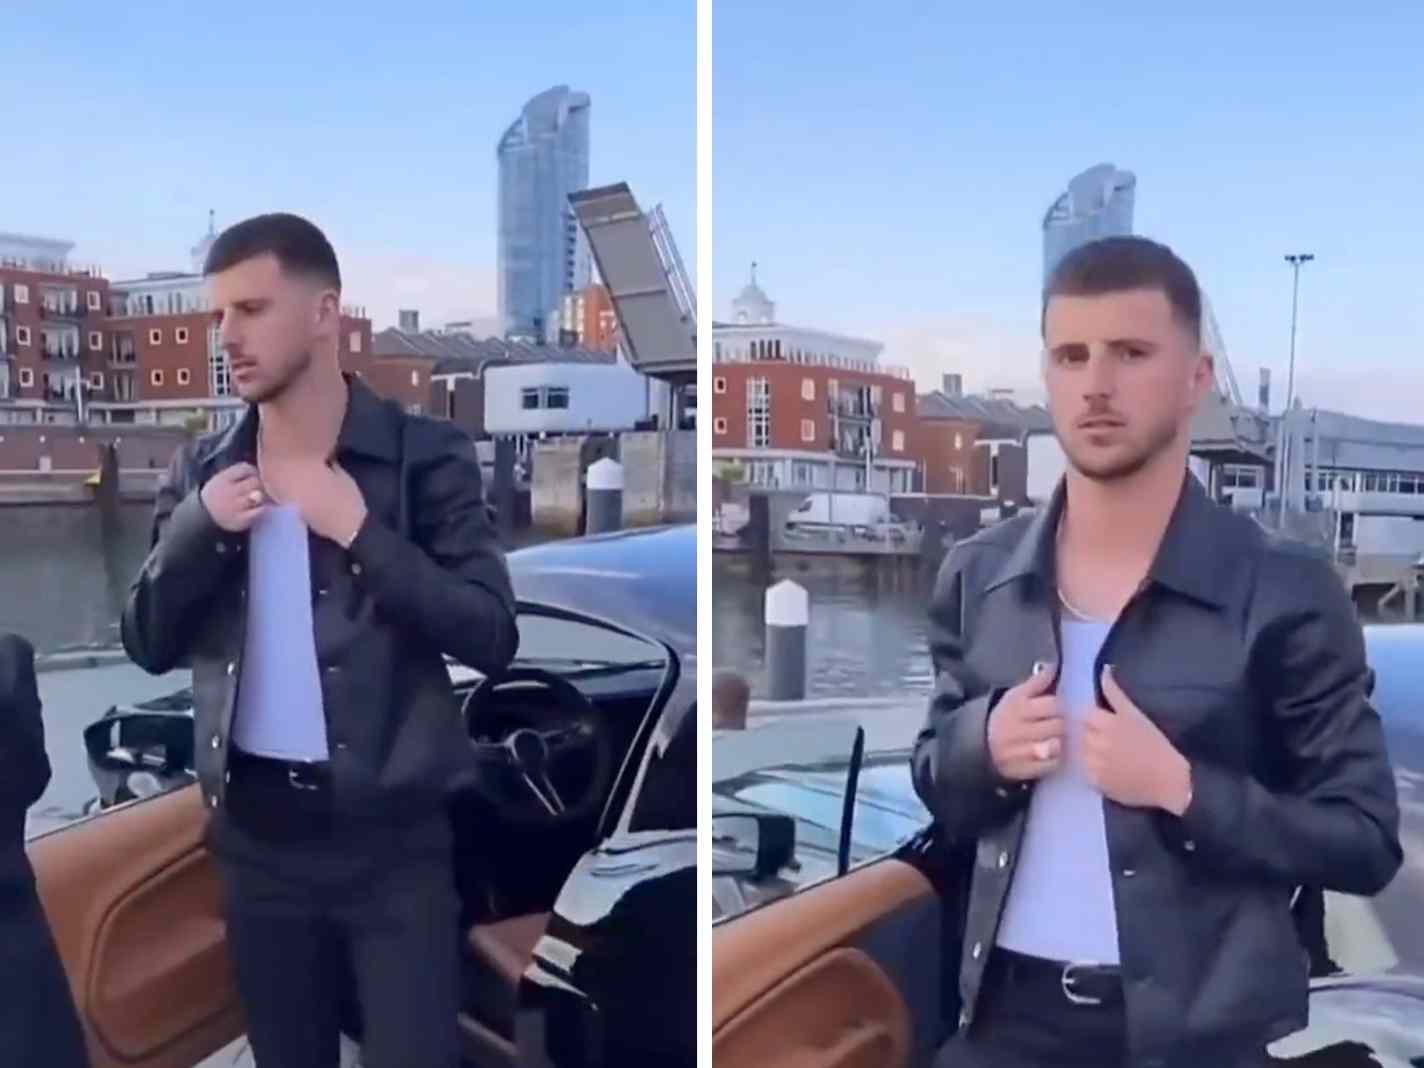 The photo shows Mason Mount during a photoshoot wearing a leather jacket, a white vest and gold chain.